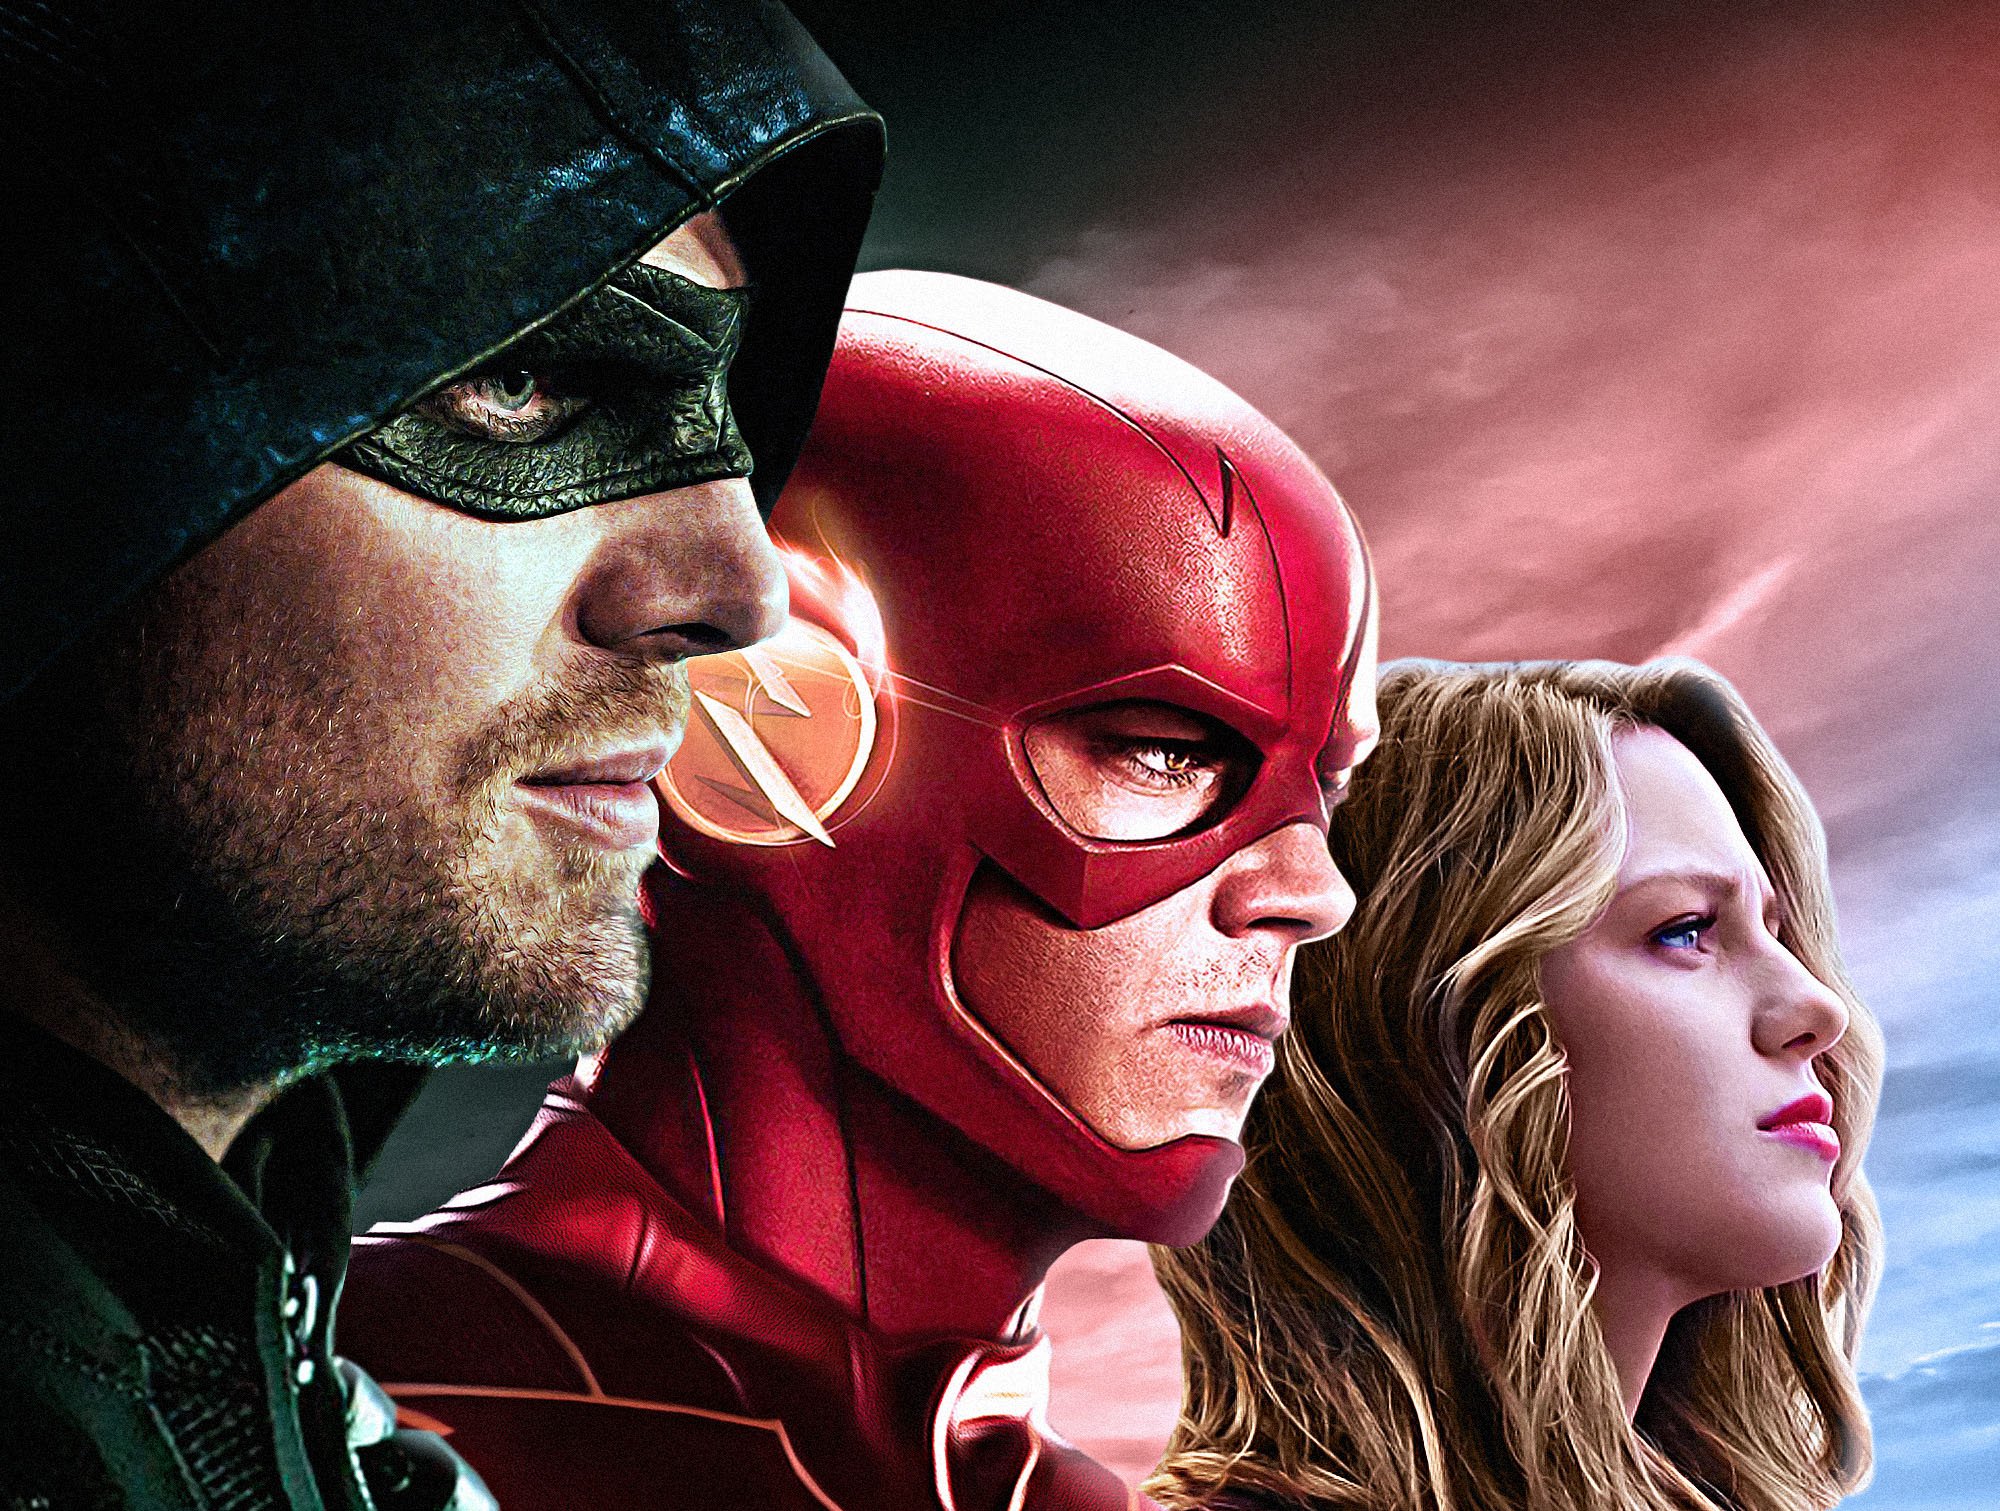 #tv shows, #arrow, #the flash, #supergirl, #hd